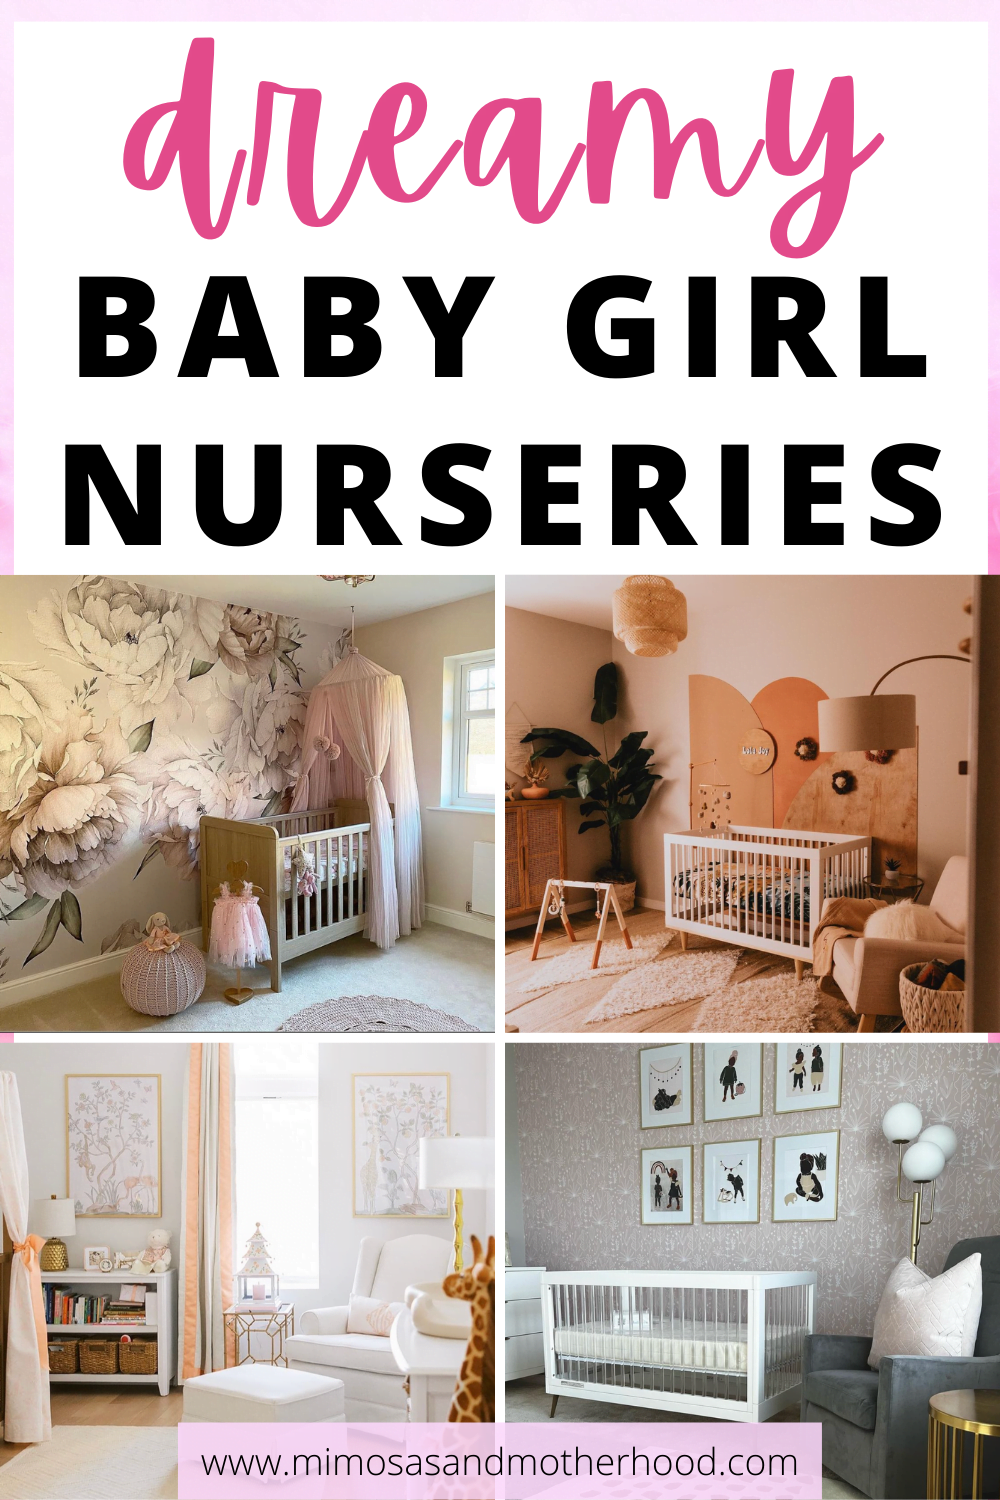 REAL Baby Girl Nursery Themes to Help Inspire Your Space